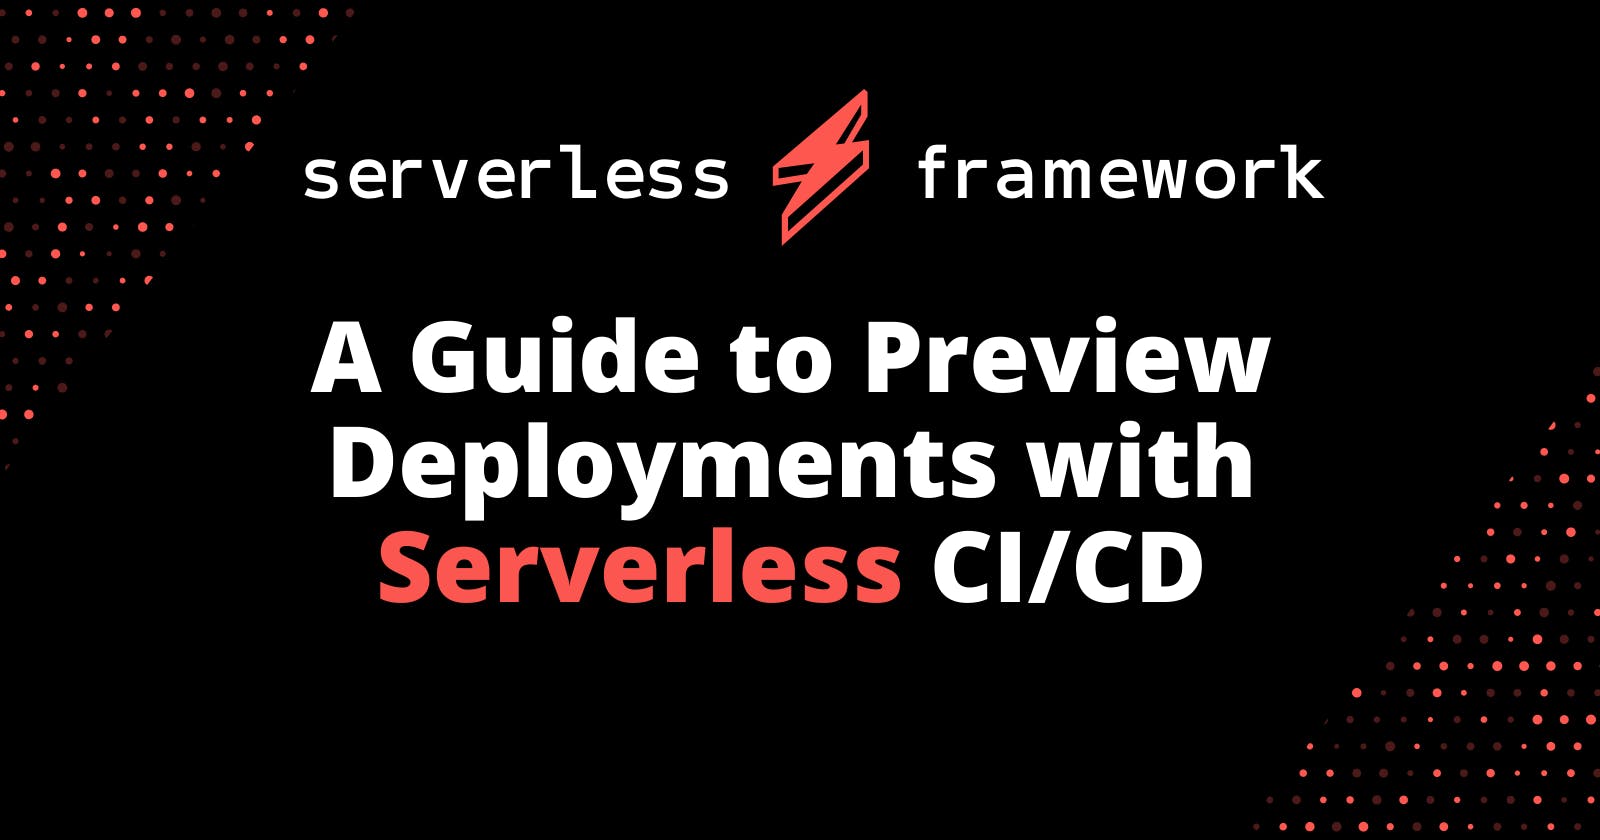 A Guide to Preview Deployments with Serverless CI/CD